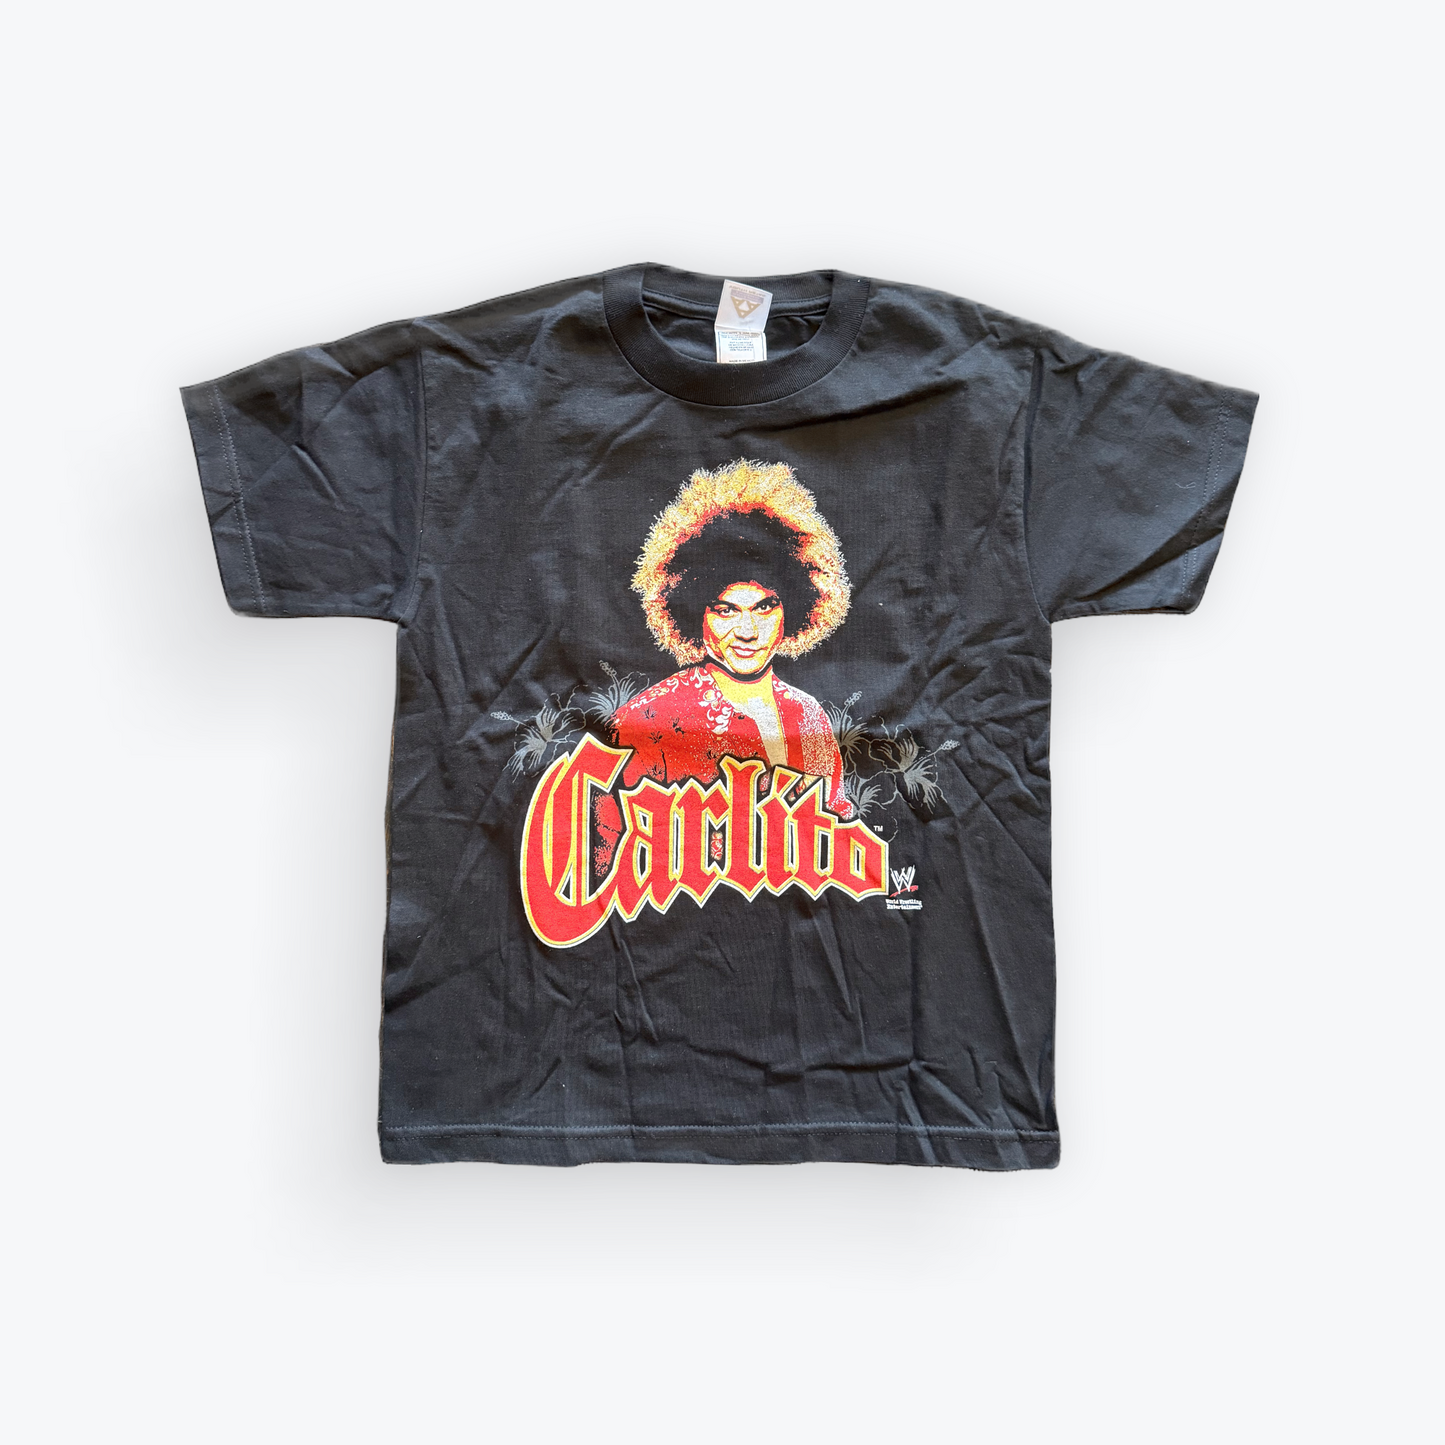 Vintage 2005 New Old Stock WWE Carlito I Know Cool Wrestling Tee